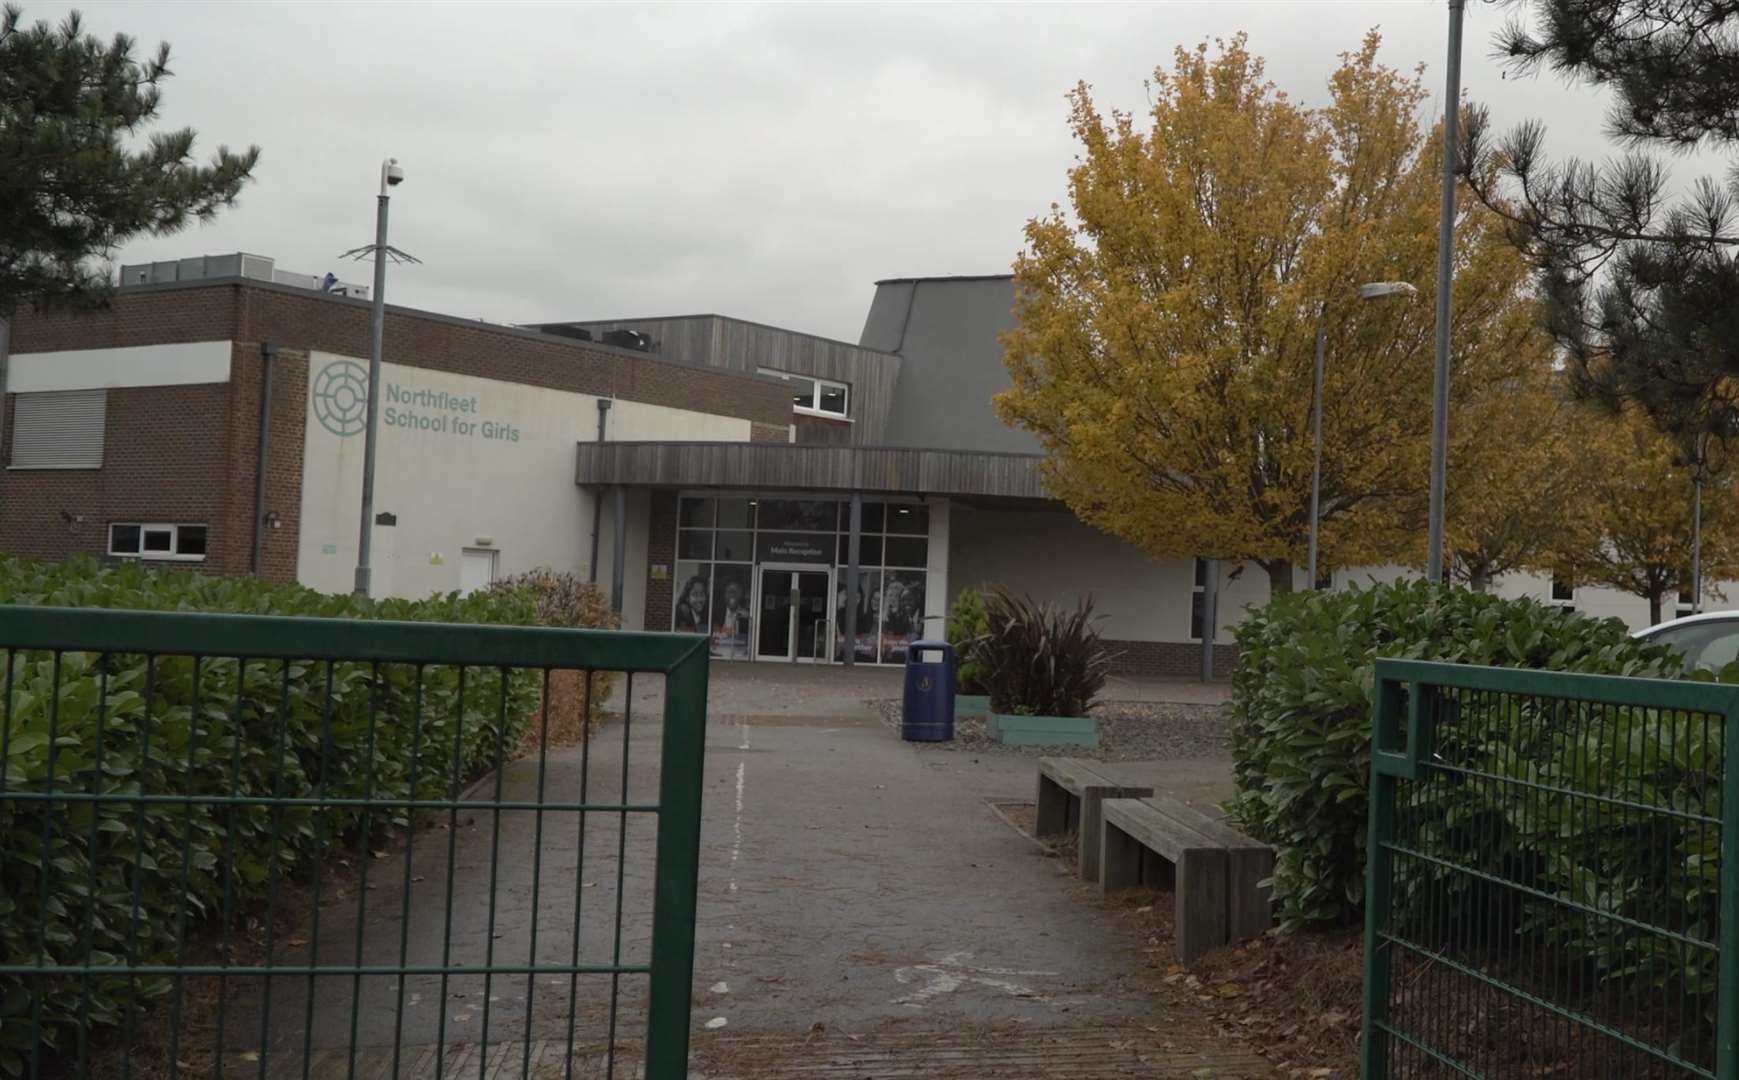 The talk was held at Northfleet School for Girls in Hall Road, Gravesend. Picture: KMTV